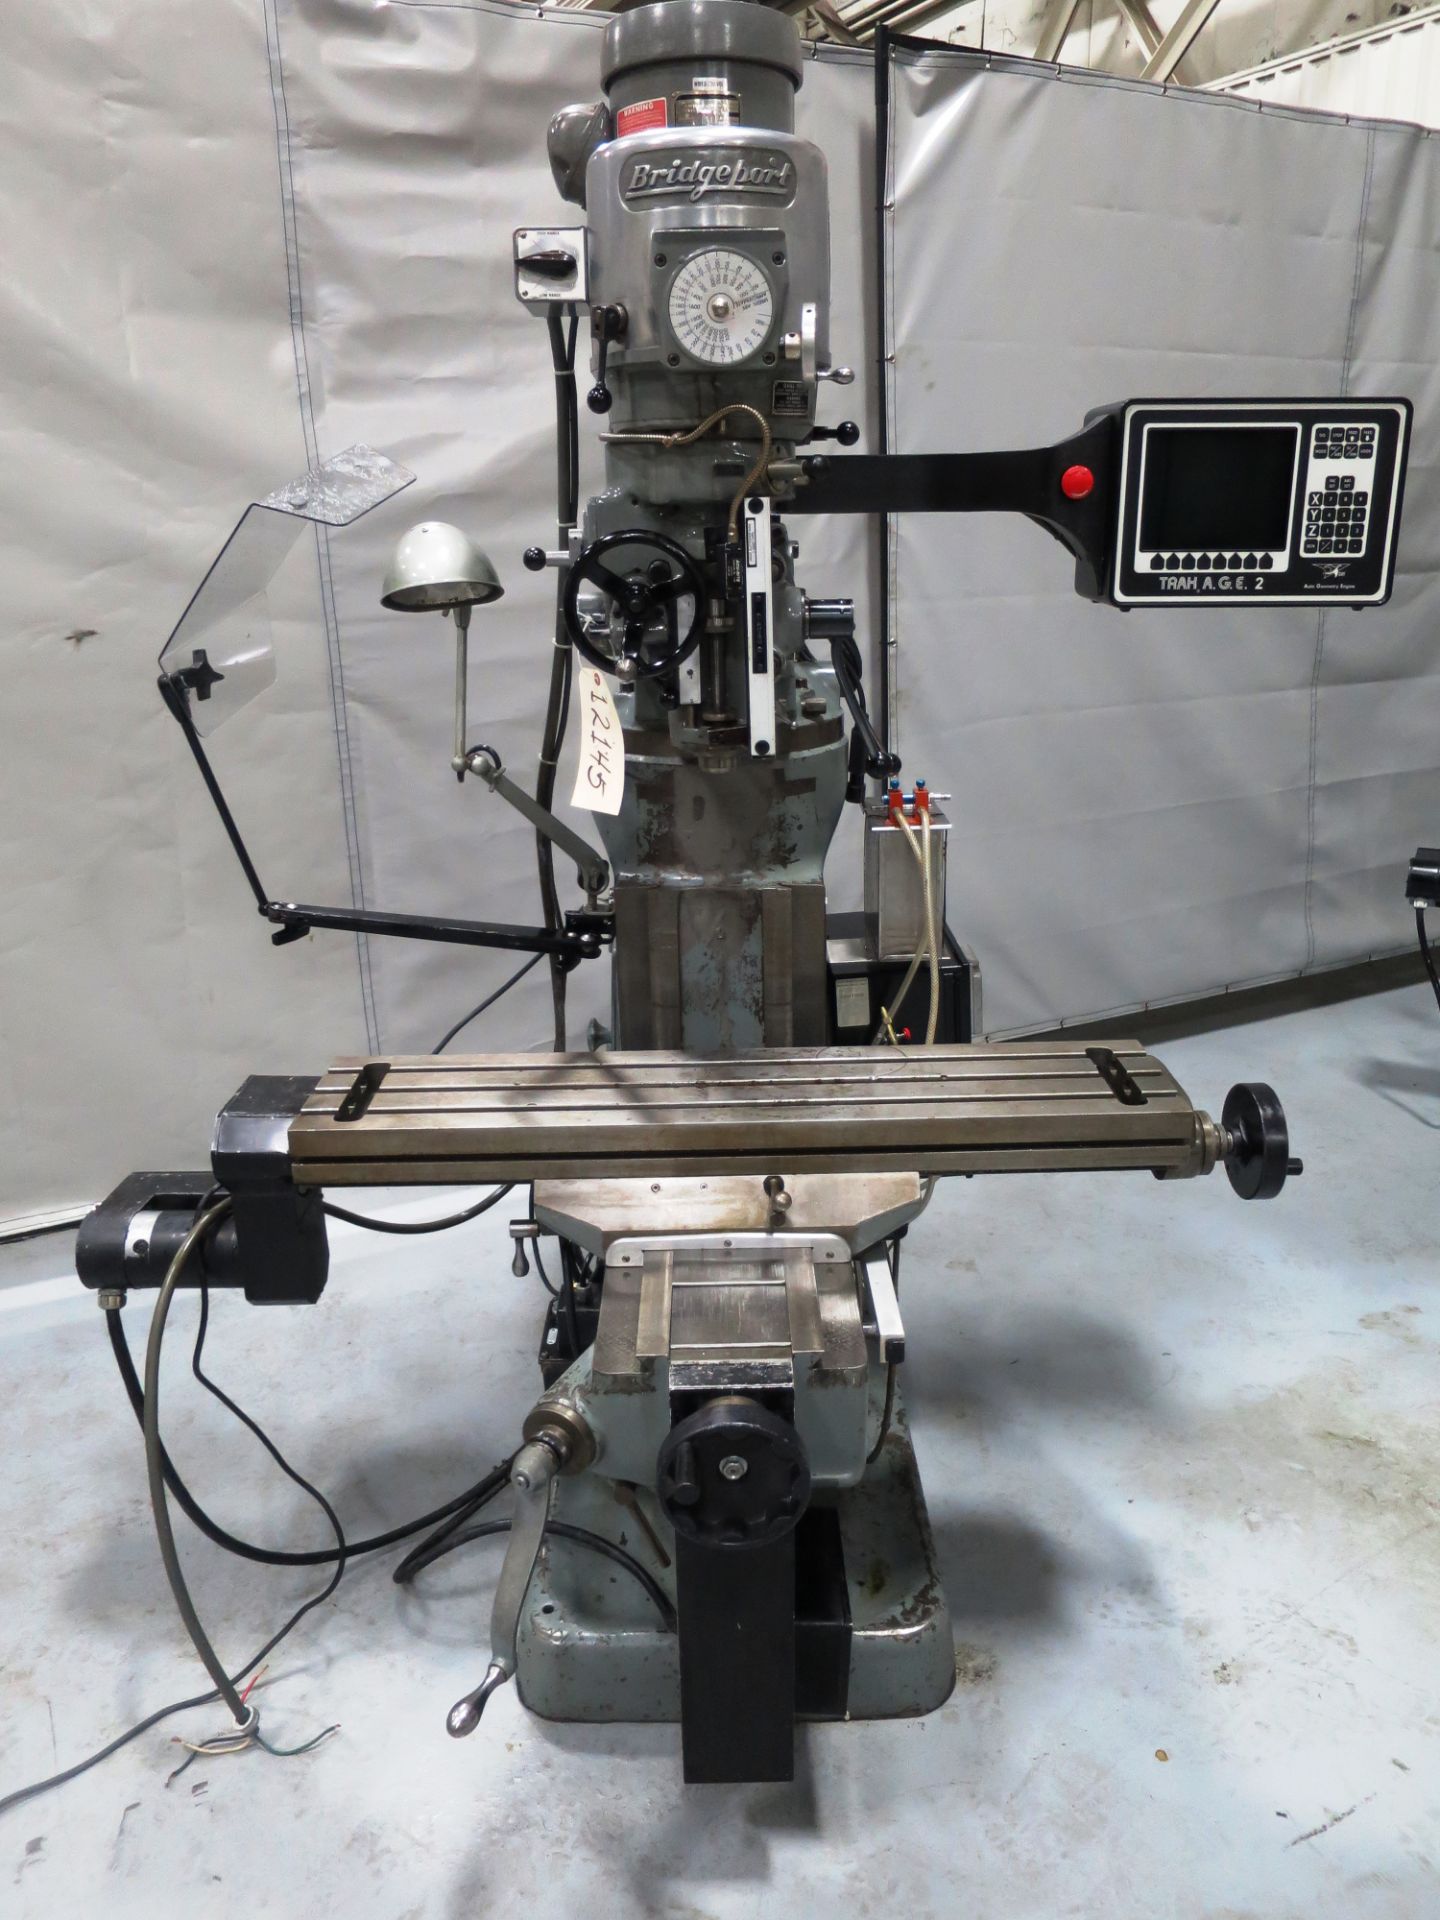 42"x9" 1.5 HP Bridgeport Milling Machine with Trak A.G.E 2 2-Axis CNC Control, S/N BR 139728